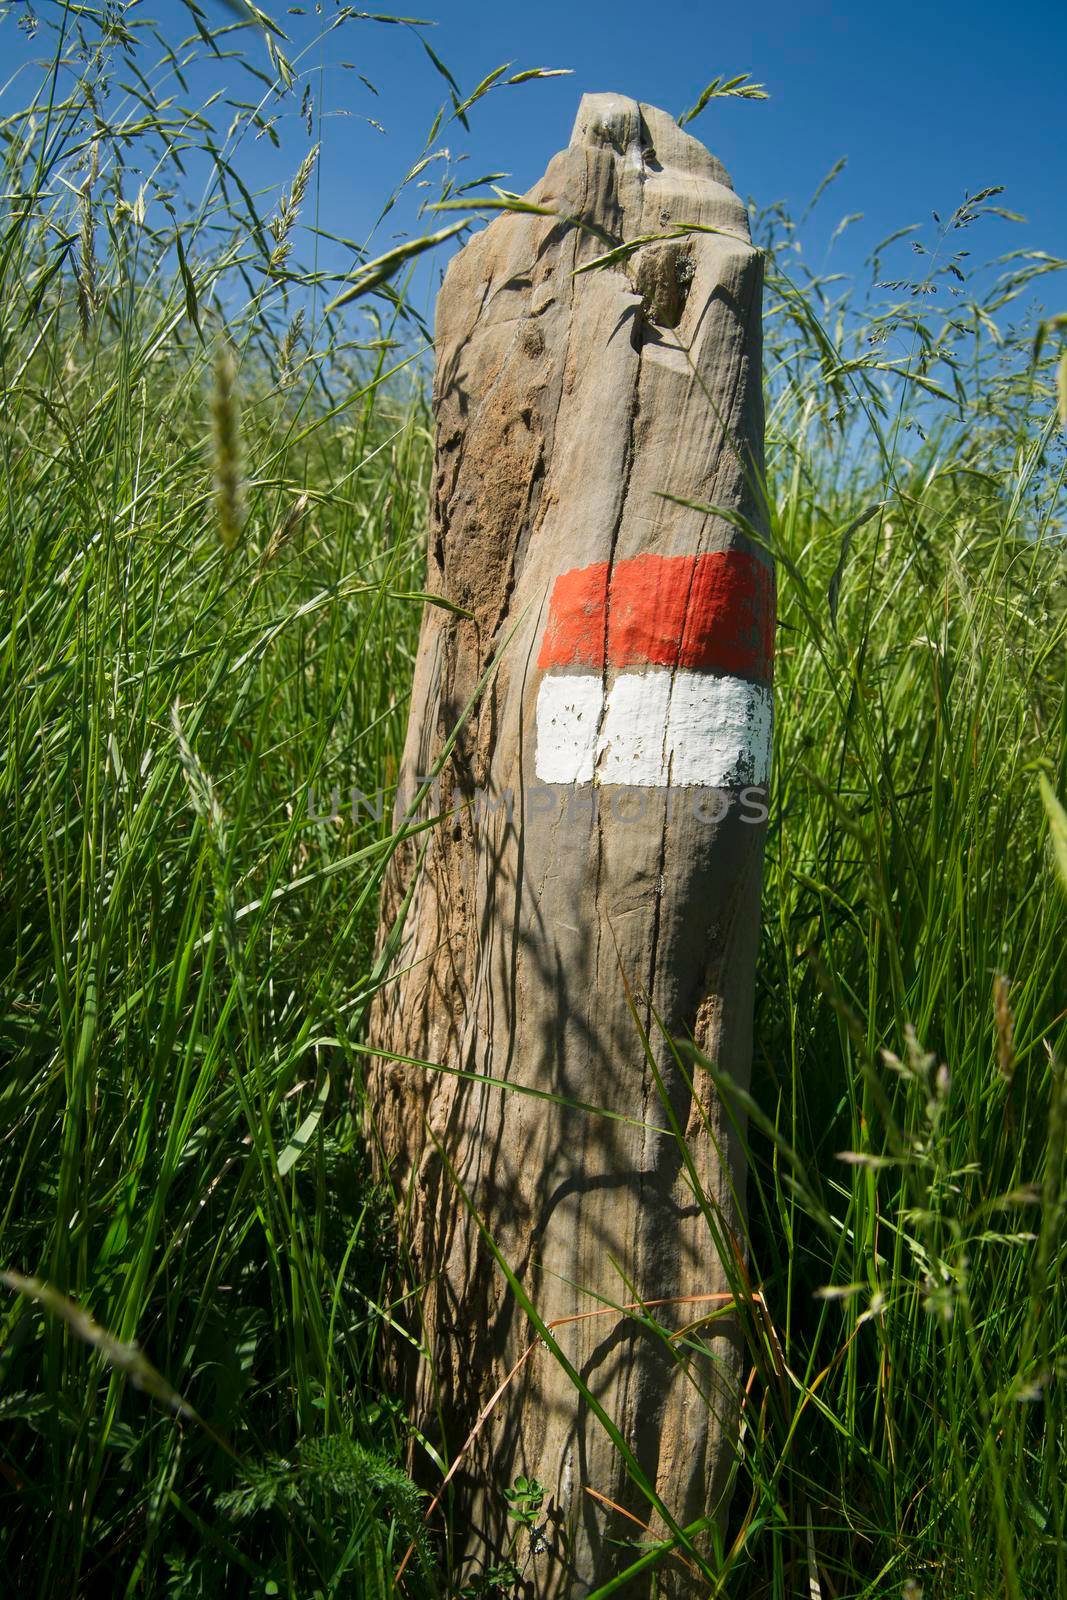 Signals typical for the identification of the path in the park of the Apuan Alps Italy